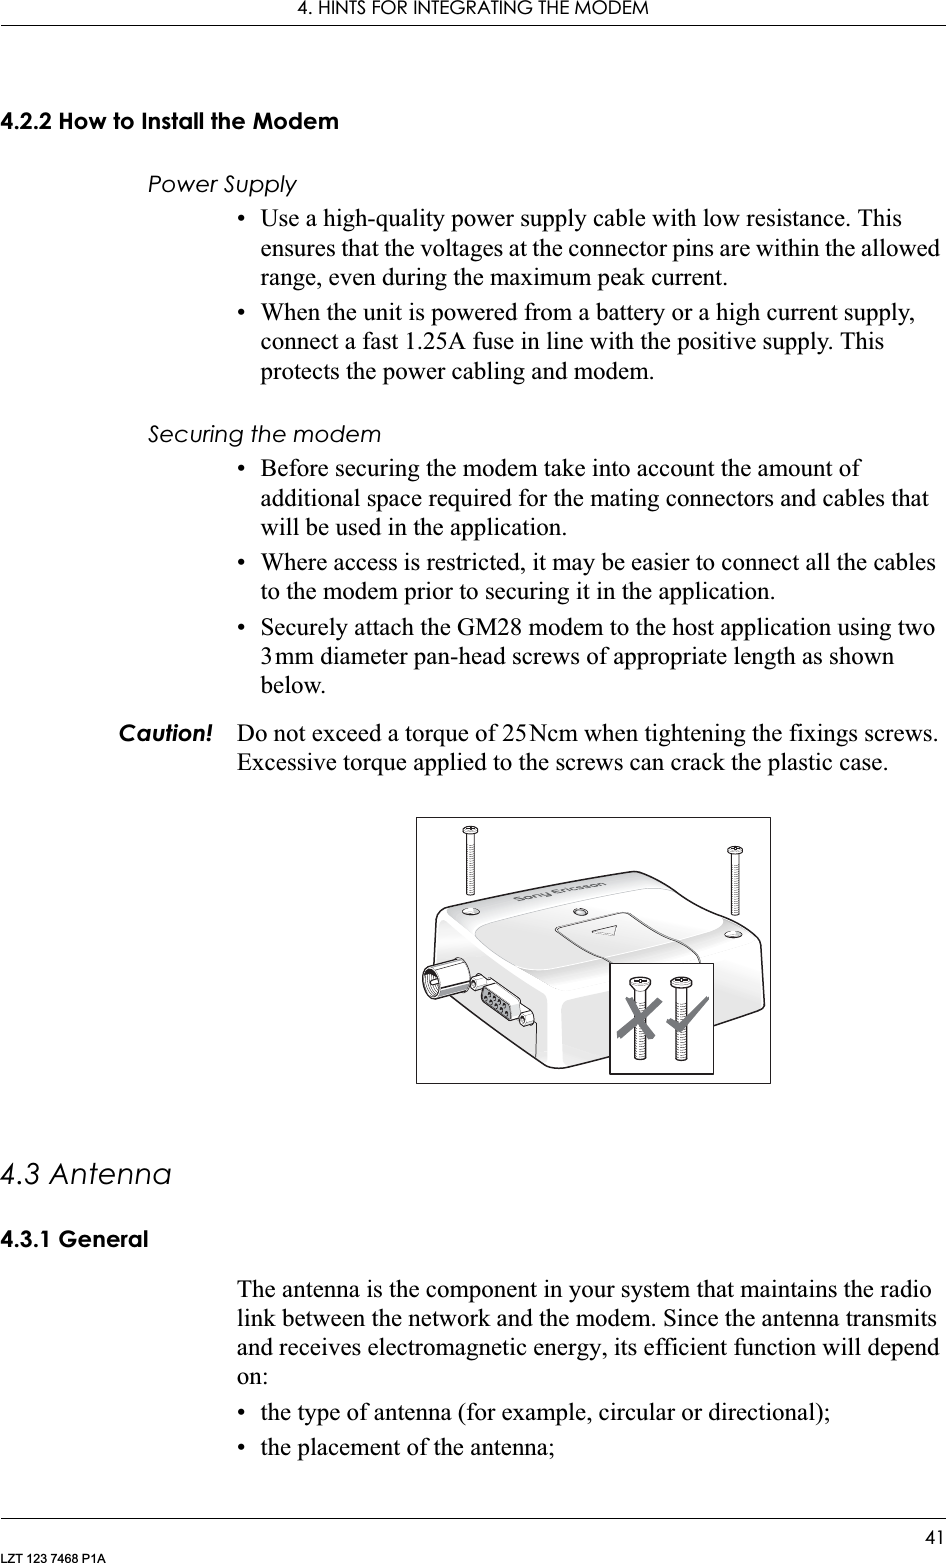 4. HINTS FOR INTEGRATING THE MODEM41LZT 123 7468 P1A4.2.2 How to Install the ModemPower Supply• Use a high-quality power supply cable with low resistance. This ensures that the voltages at the connector pins are within the allowed range, even during the maximum peak current.• When the unit is powered from a battery or a high current supply, connect a fast 1.25A fuse in line with the positive supply. This protects the power cabling and modem.Securing the modem• Before securing the modem take into account the amount of additional space required for the mating connectors and cables that will be used in the application.• Where access is restricted, it may be easier to connect all the cables to the modem prior to securing it in the application.• Securely attach the GM28 modem to the host application using two 3mm diameter pan-head screws of appropriate length as shown below.Caution! Do not exceed a torque of 25Ncm when tightening the fixings screws. Excessive torque applied to the screws can crack the plastic case.4.3 Antenna4.3.1 GeneralThe antenna is the component in your system that maintains the radio link between the network and the modem. Since the antenna transmits and receives electromagnetic energy, its efficient function will depend on:• the type of antenna (for example, circular or directional);• the placement of the antenna;